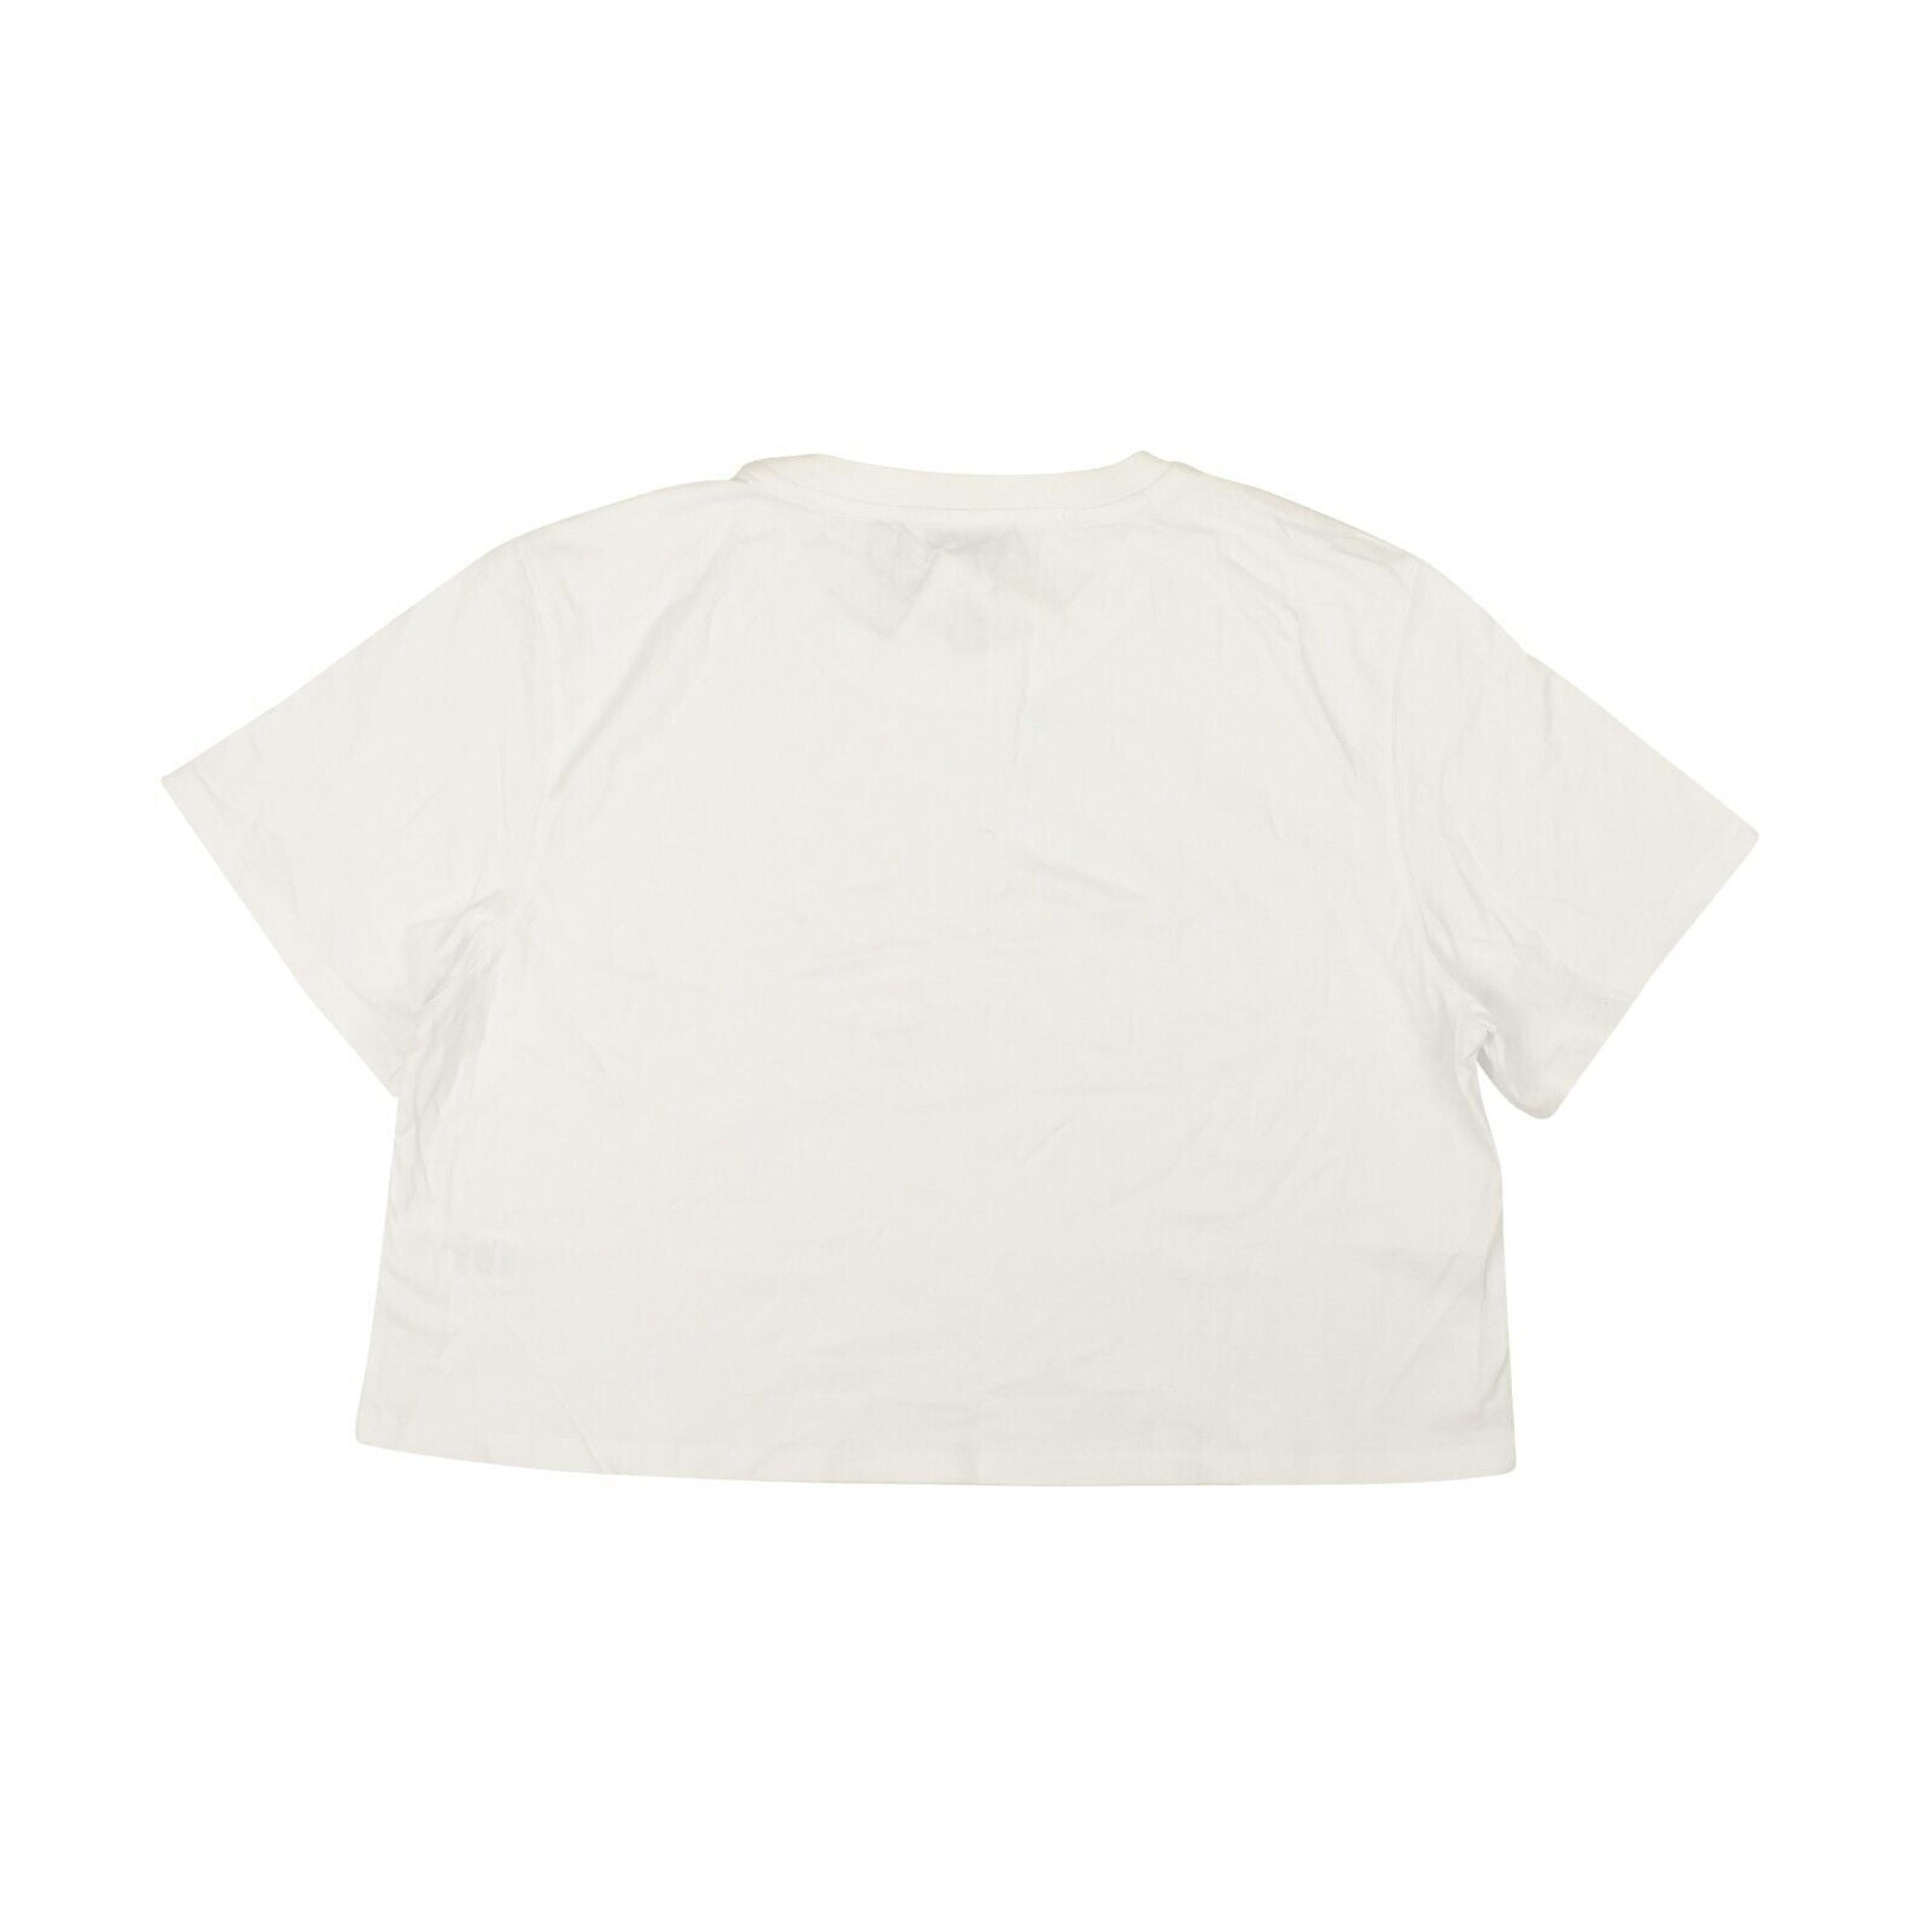 Alternate View 2 of Opening Ceremony Blank Oc Cropped T-Shirt - Chalk